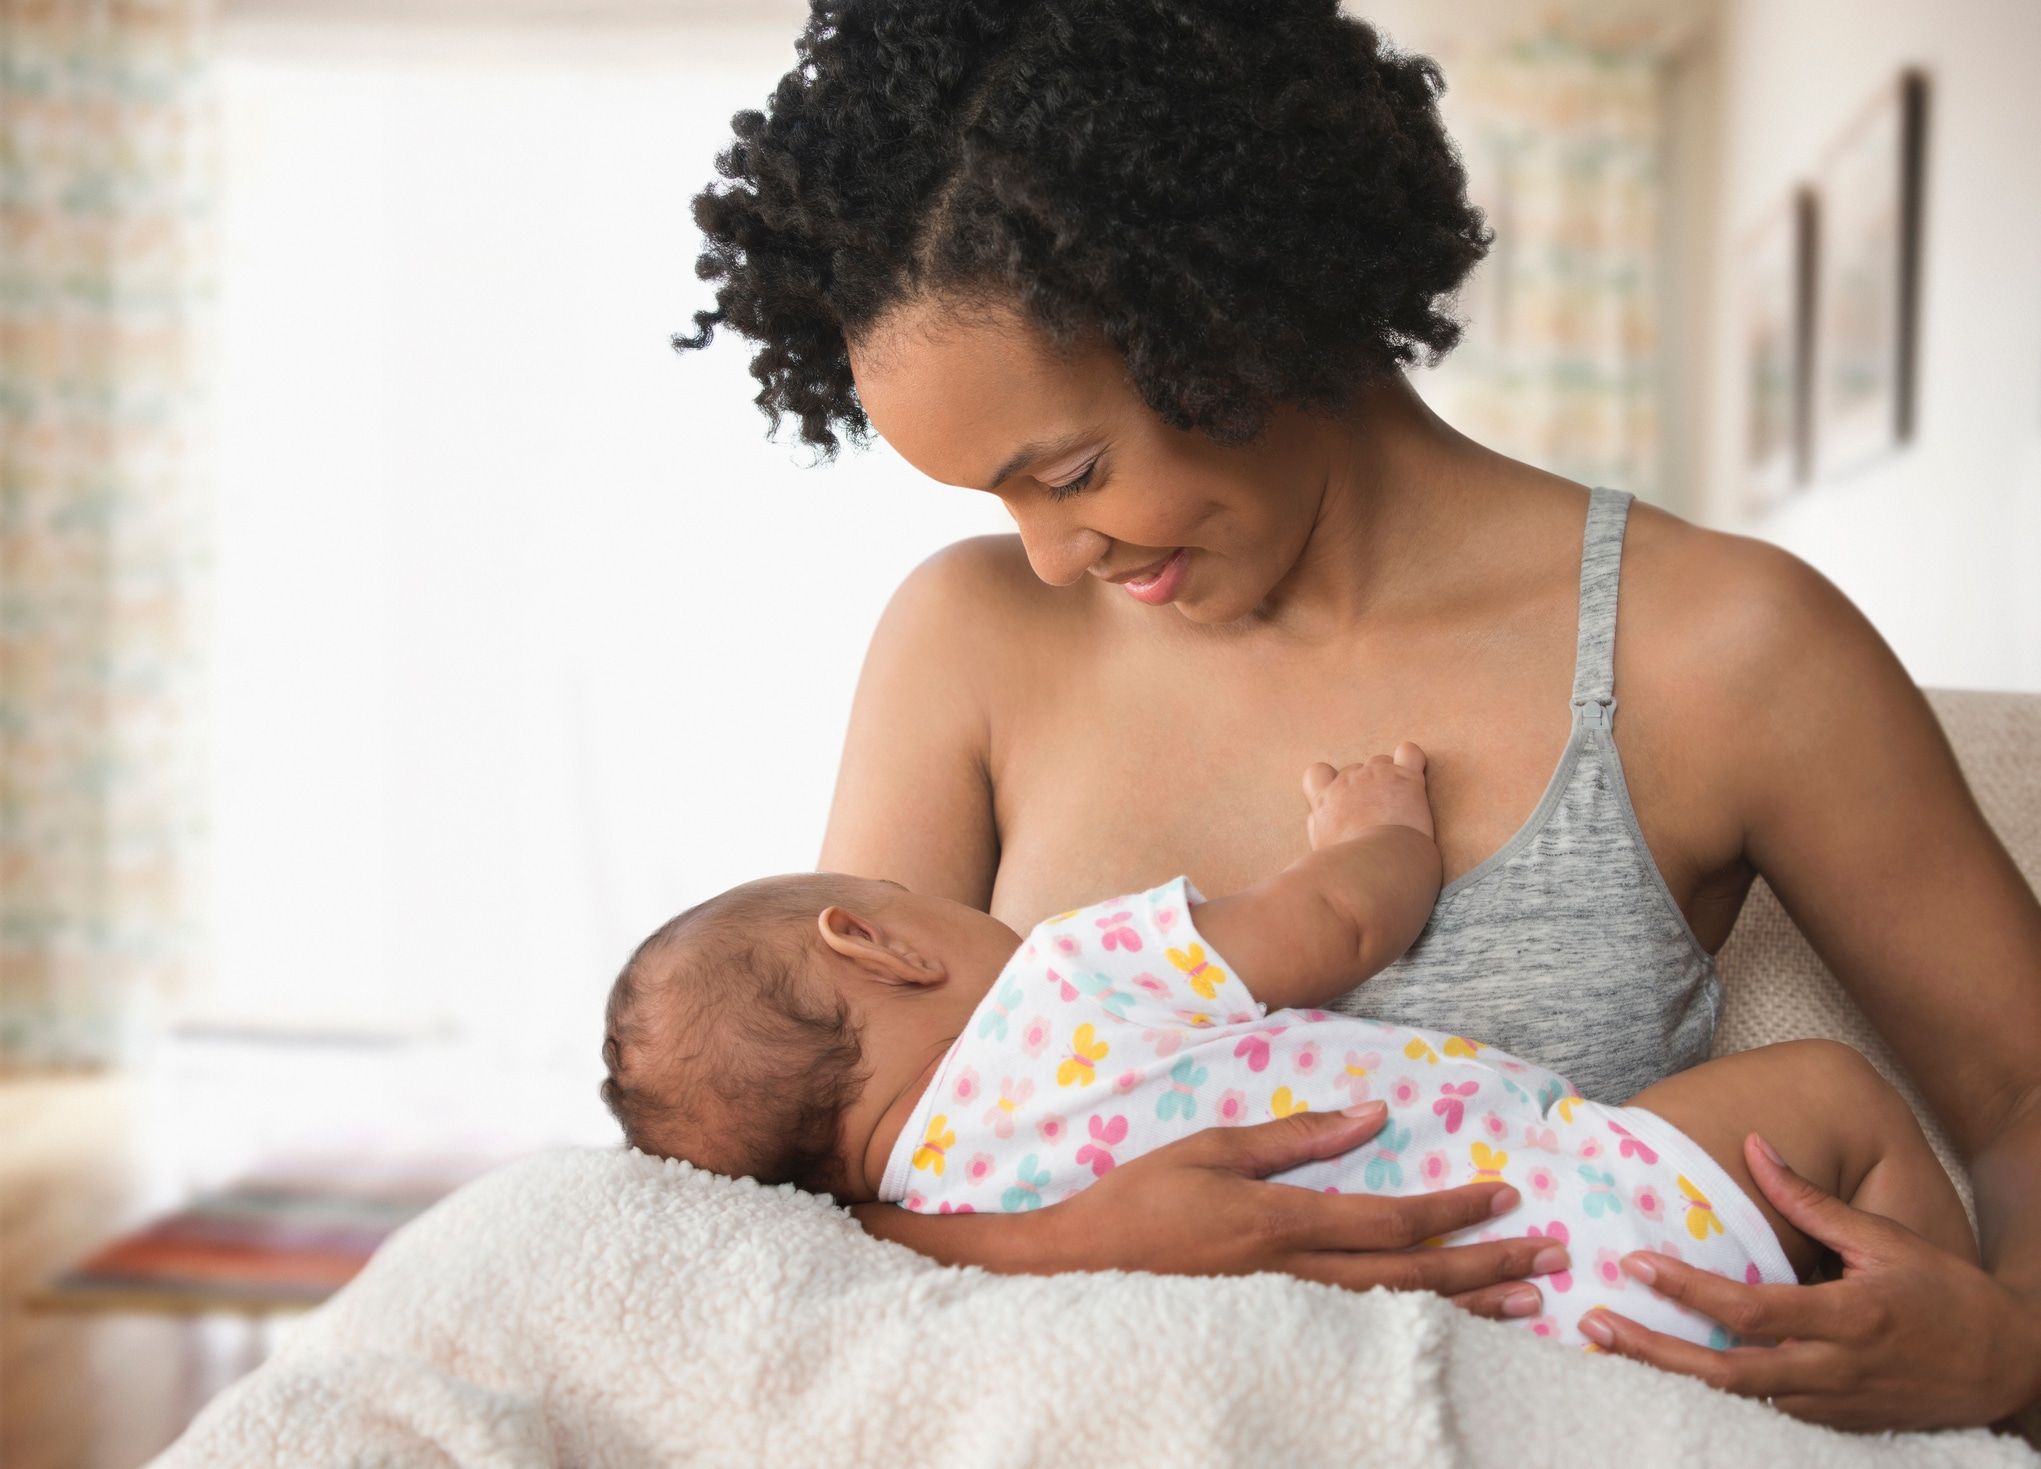 When (and How!) Do You Stop Breastfeeding? Experts & Mamas Weigh In